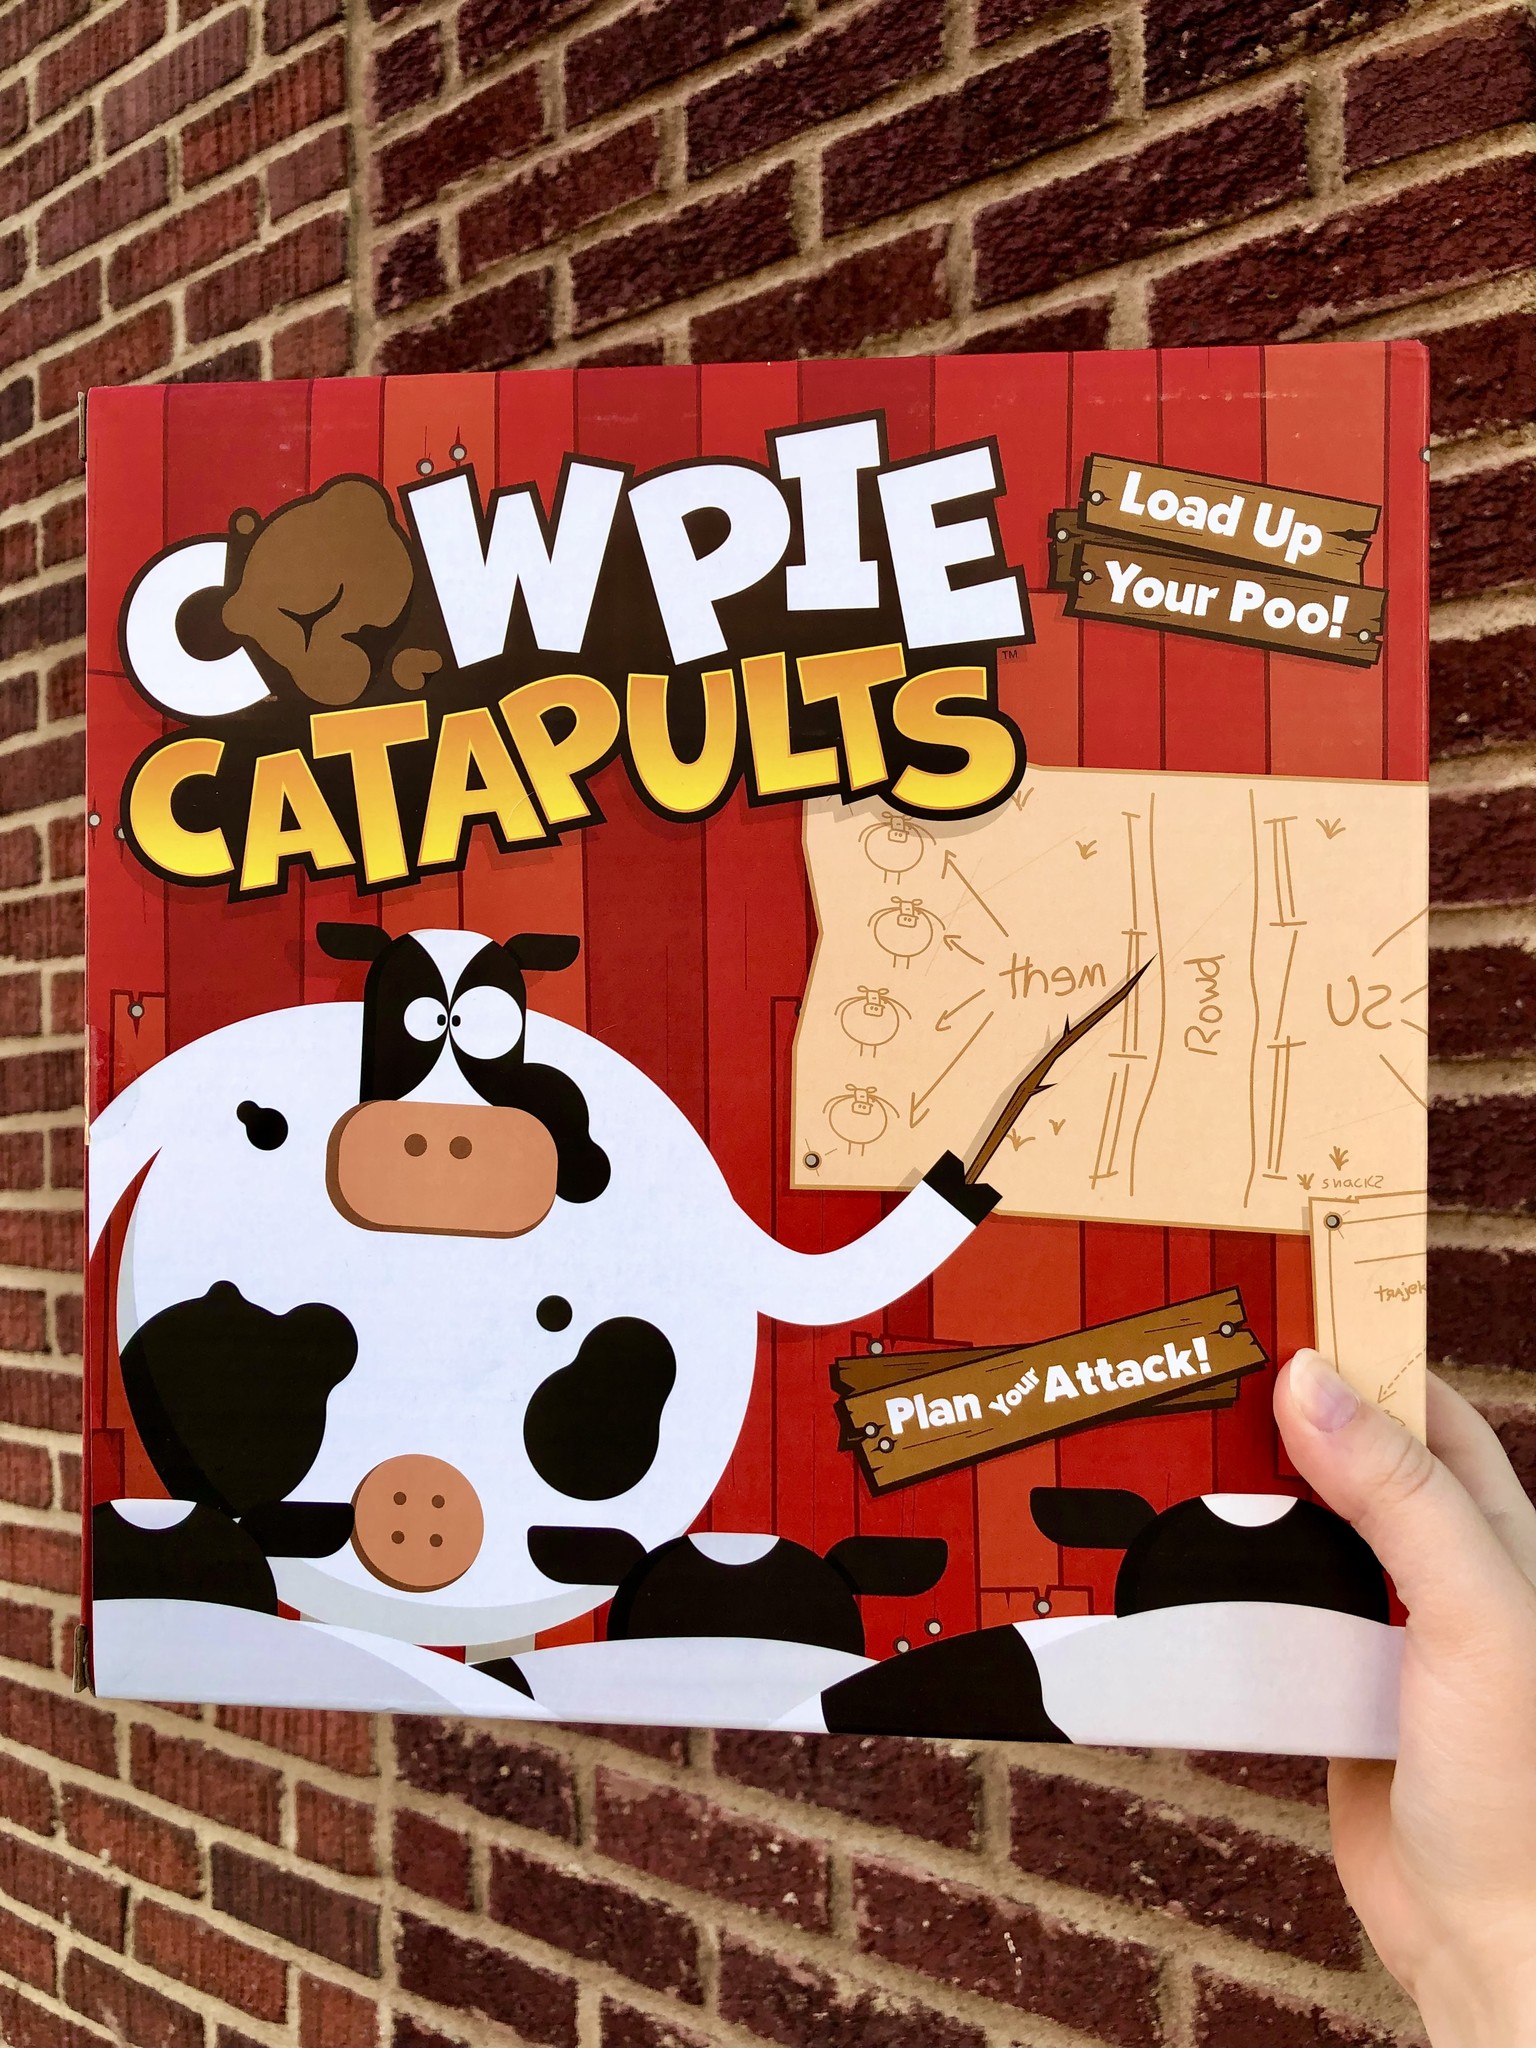 The Good Game Company Cow Pie Catapults